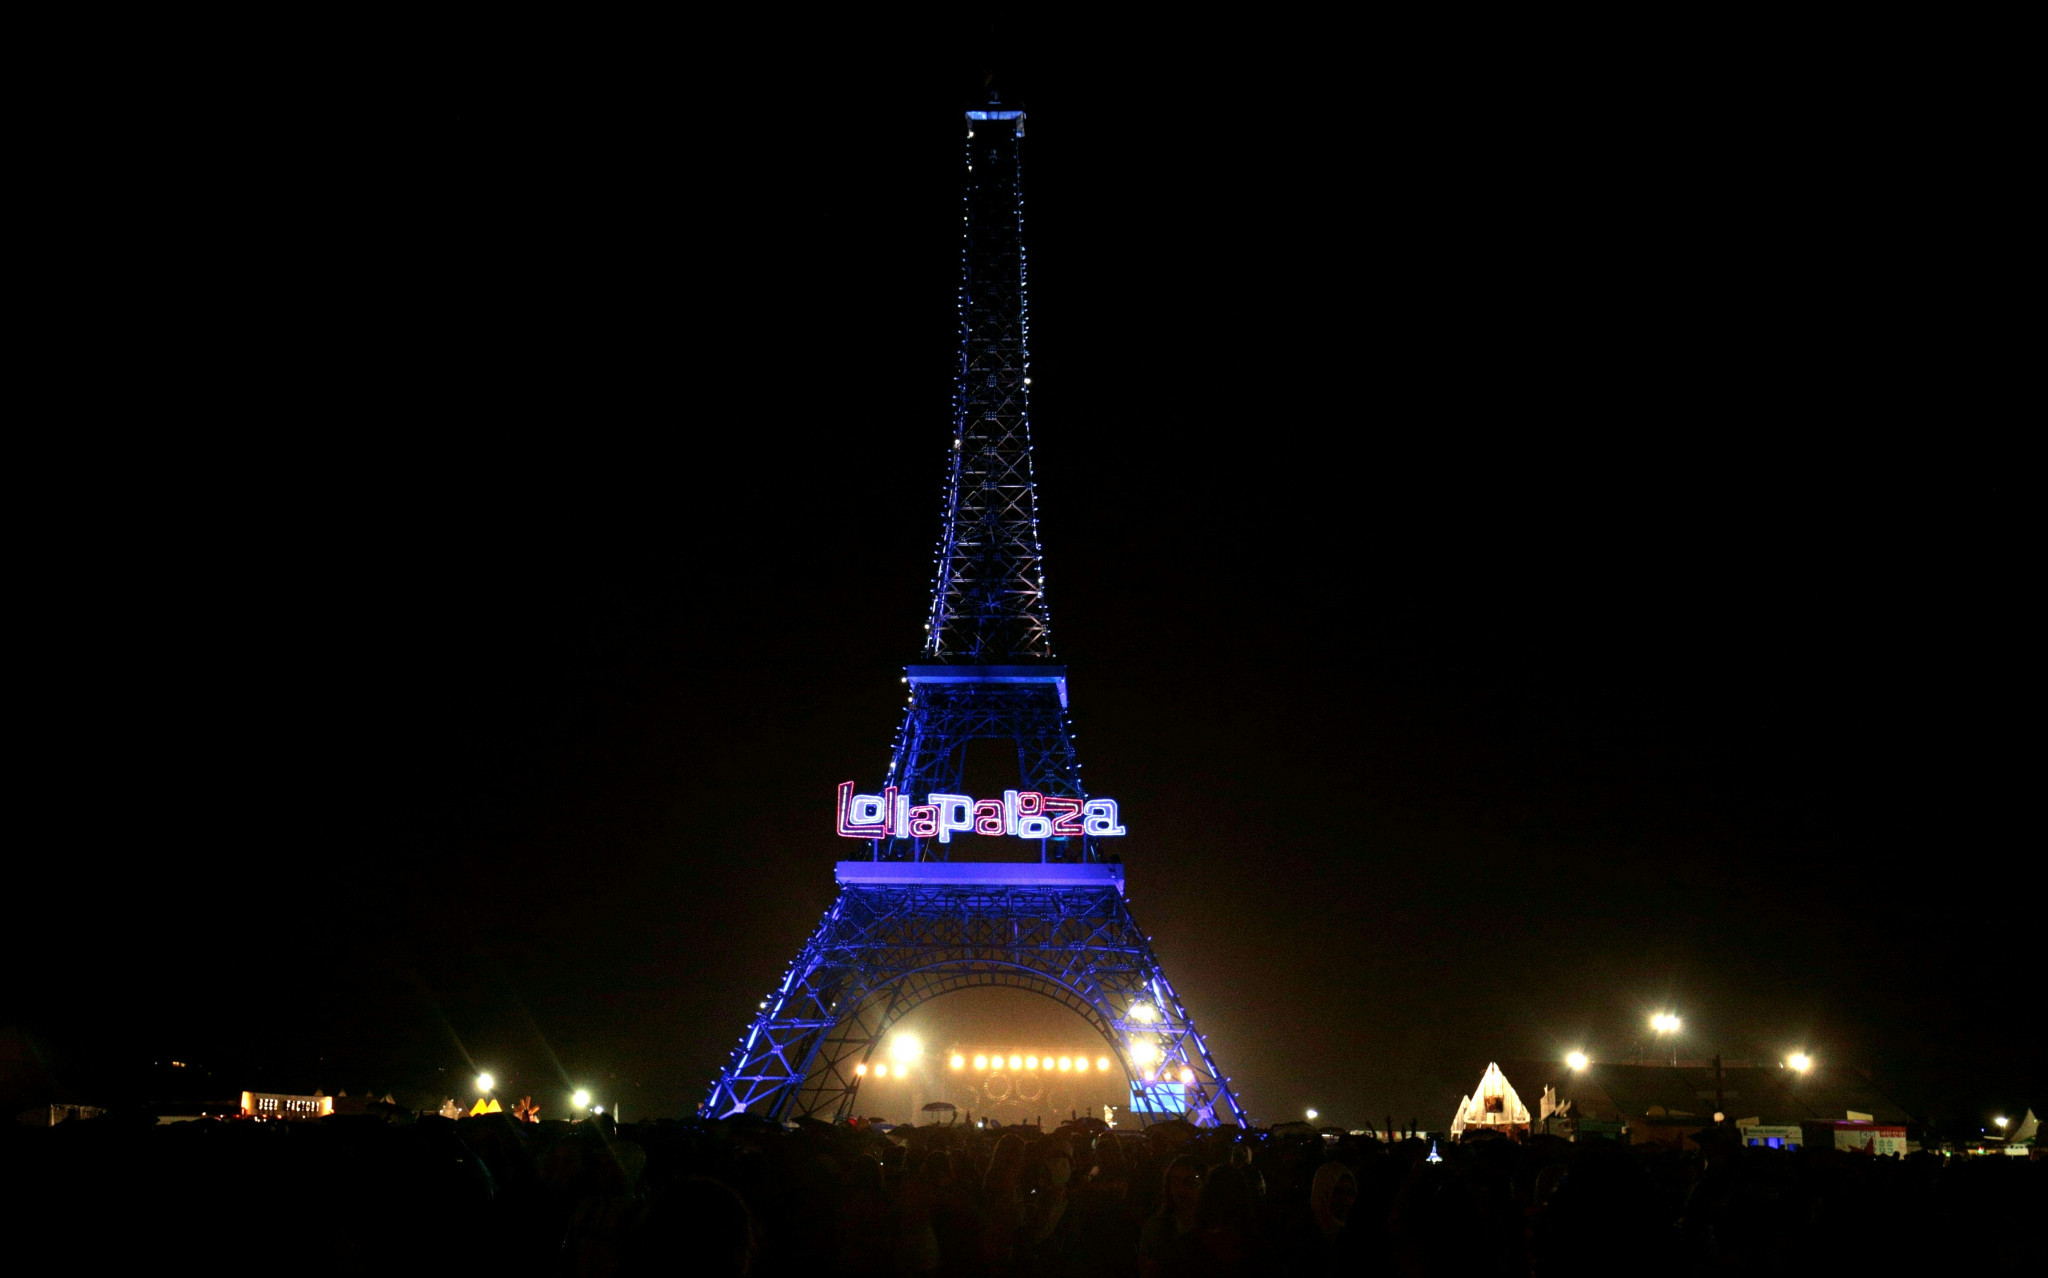 Lollapalooza could be affected due to the Paris 2024 Olympics ©Getty Images